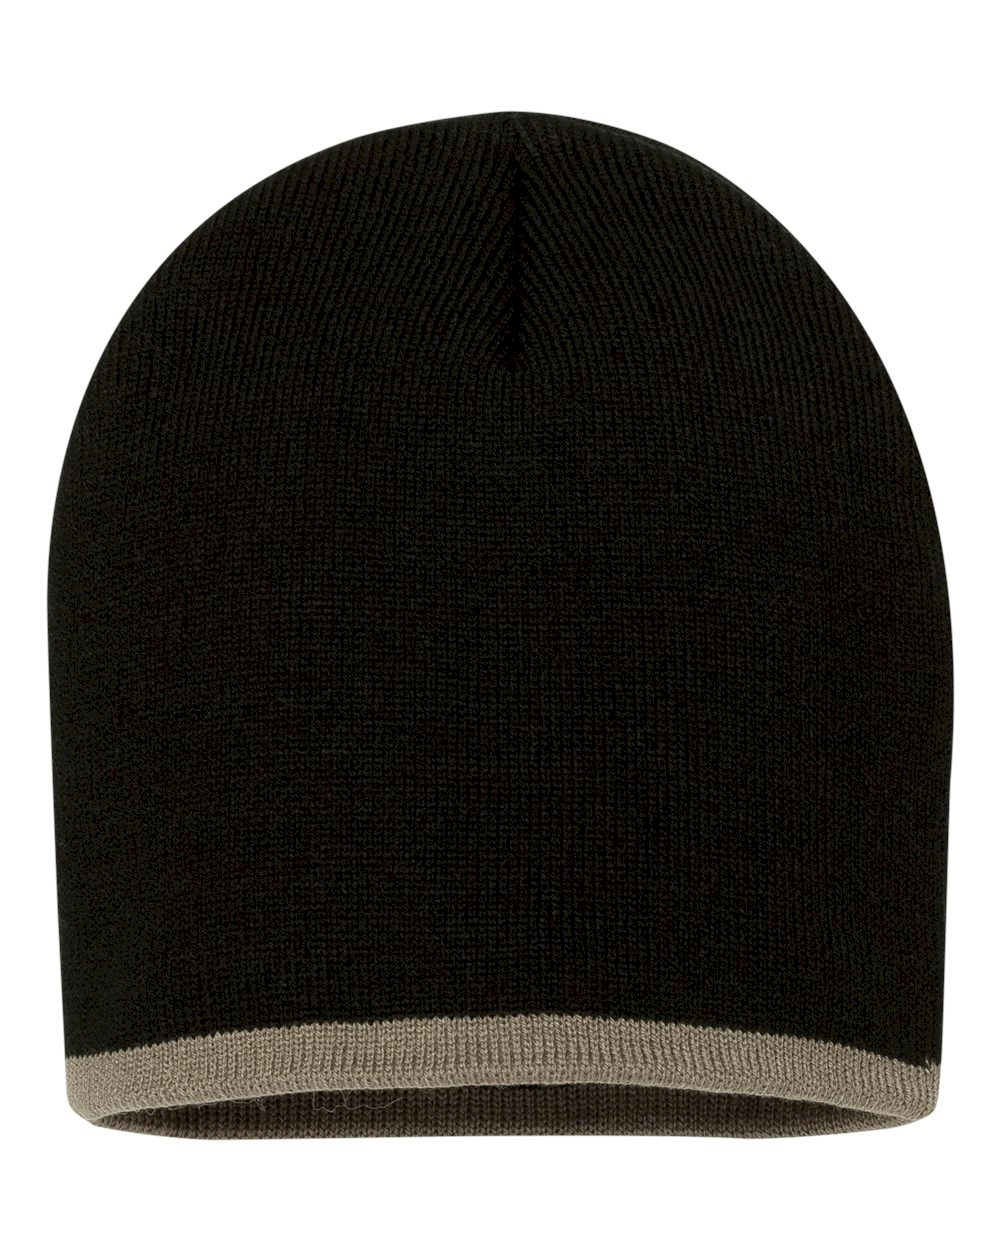 8" Knit Beanie with Striped Bottom Embroidery Blanks - BLACK/TAUPE